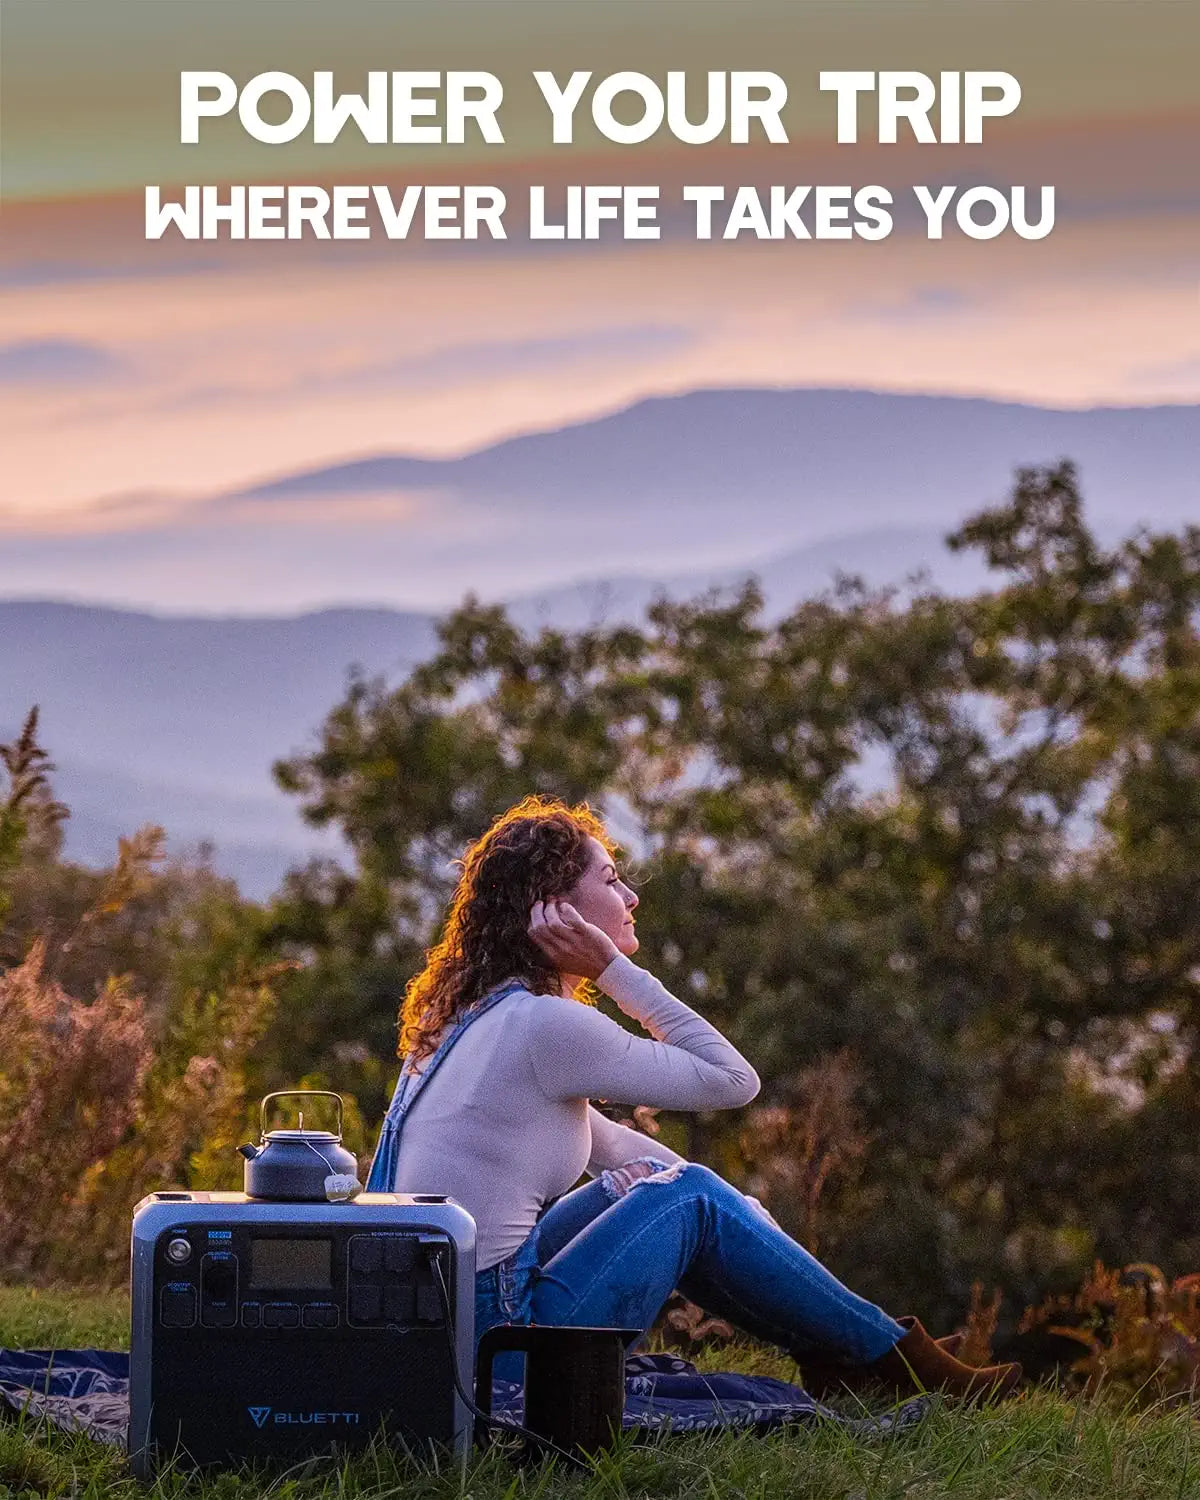 POWER YOUR TRIP WHEREVER LIFE TAKES YOU